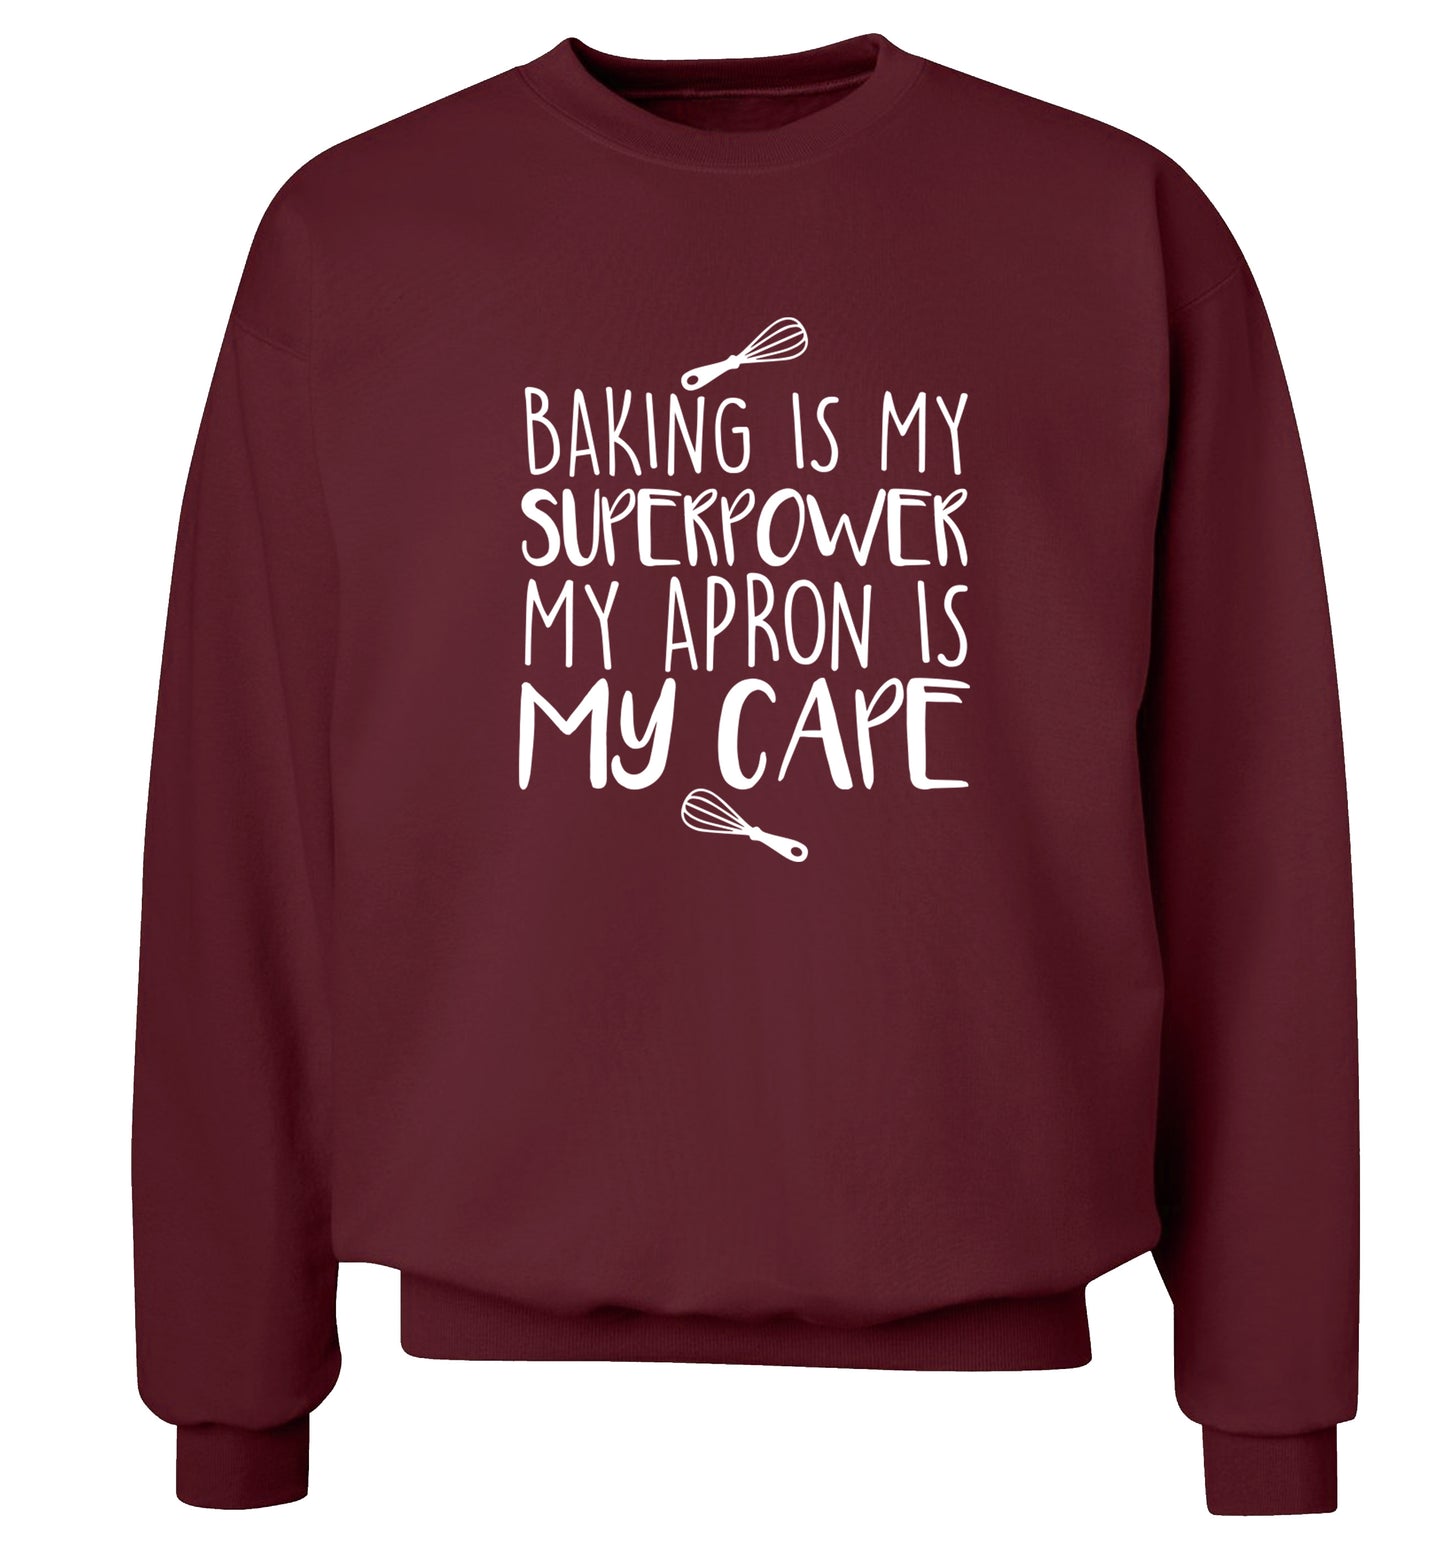 Baking is my superpower my apron is my cape Adult's unisex maroon Sweater 2XL